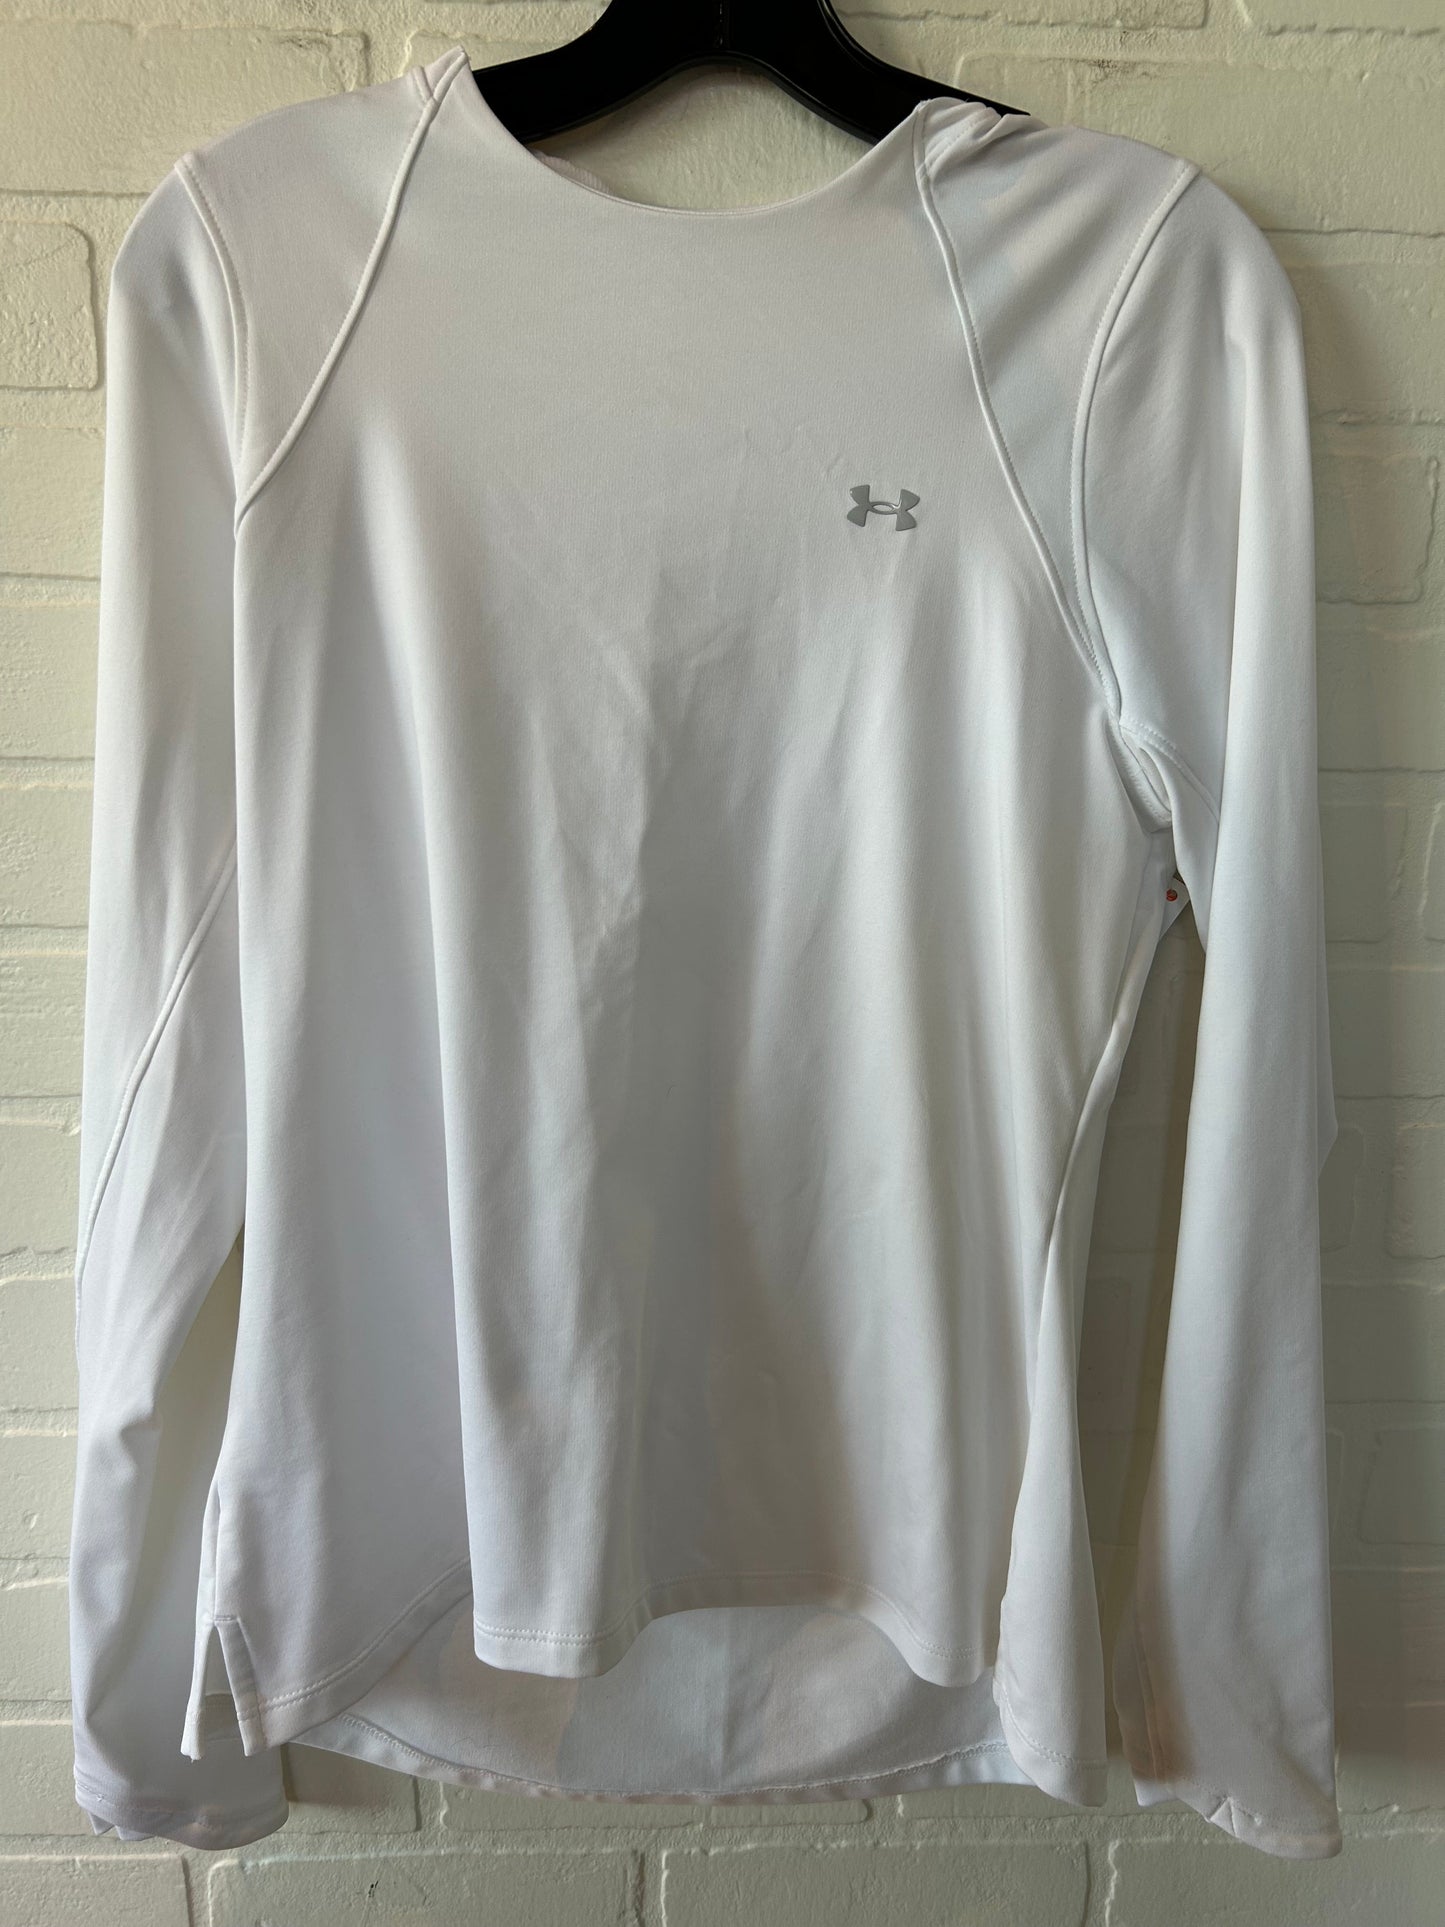 White Athletic Top Long Sleeve Crewneck Under Armour, Size M